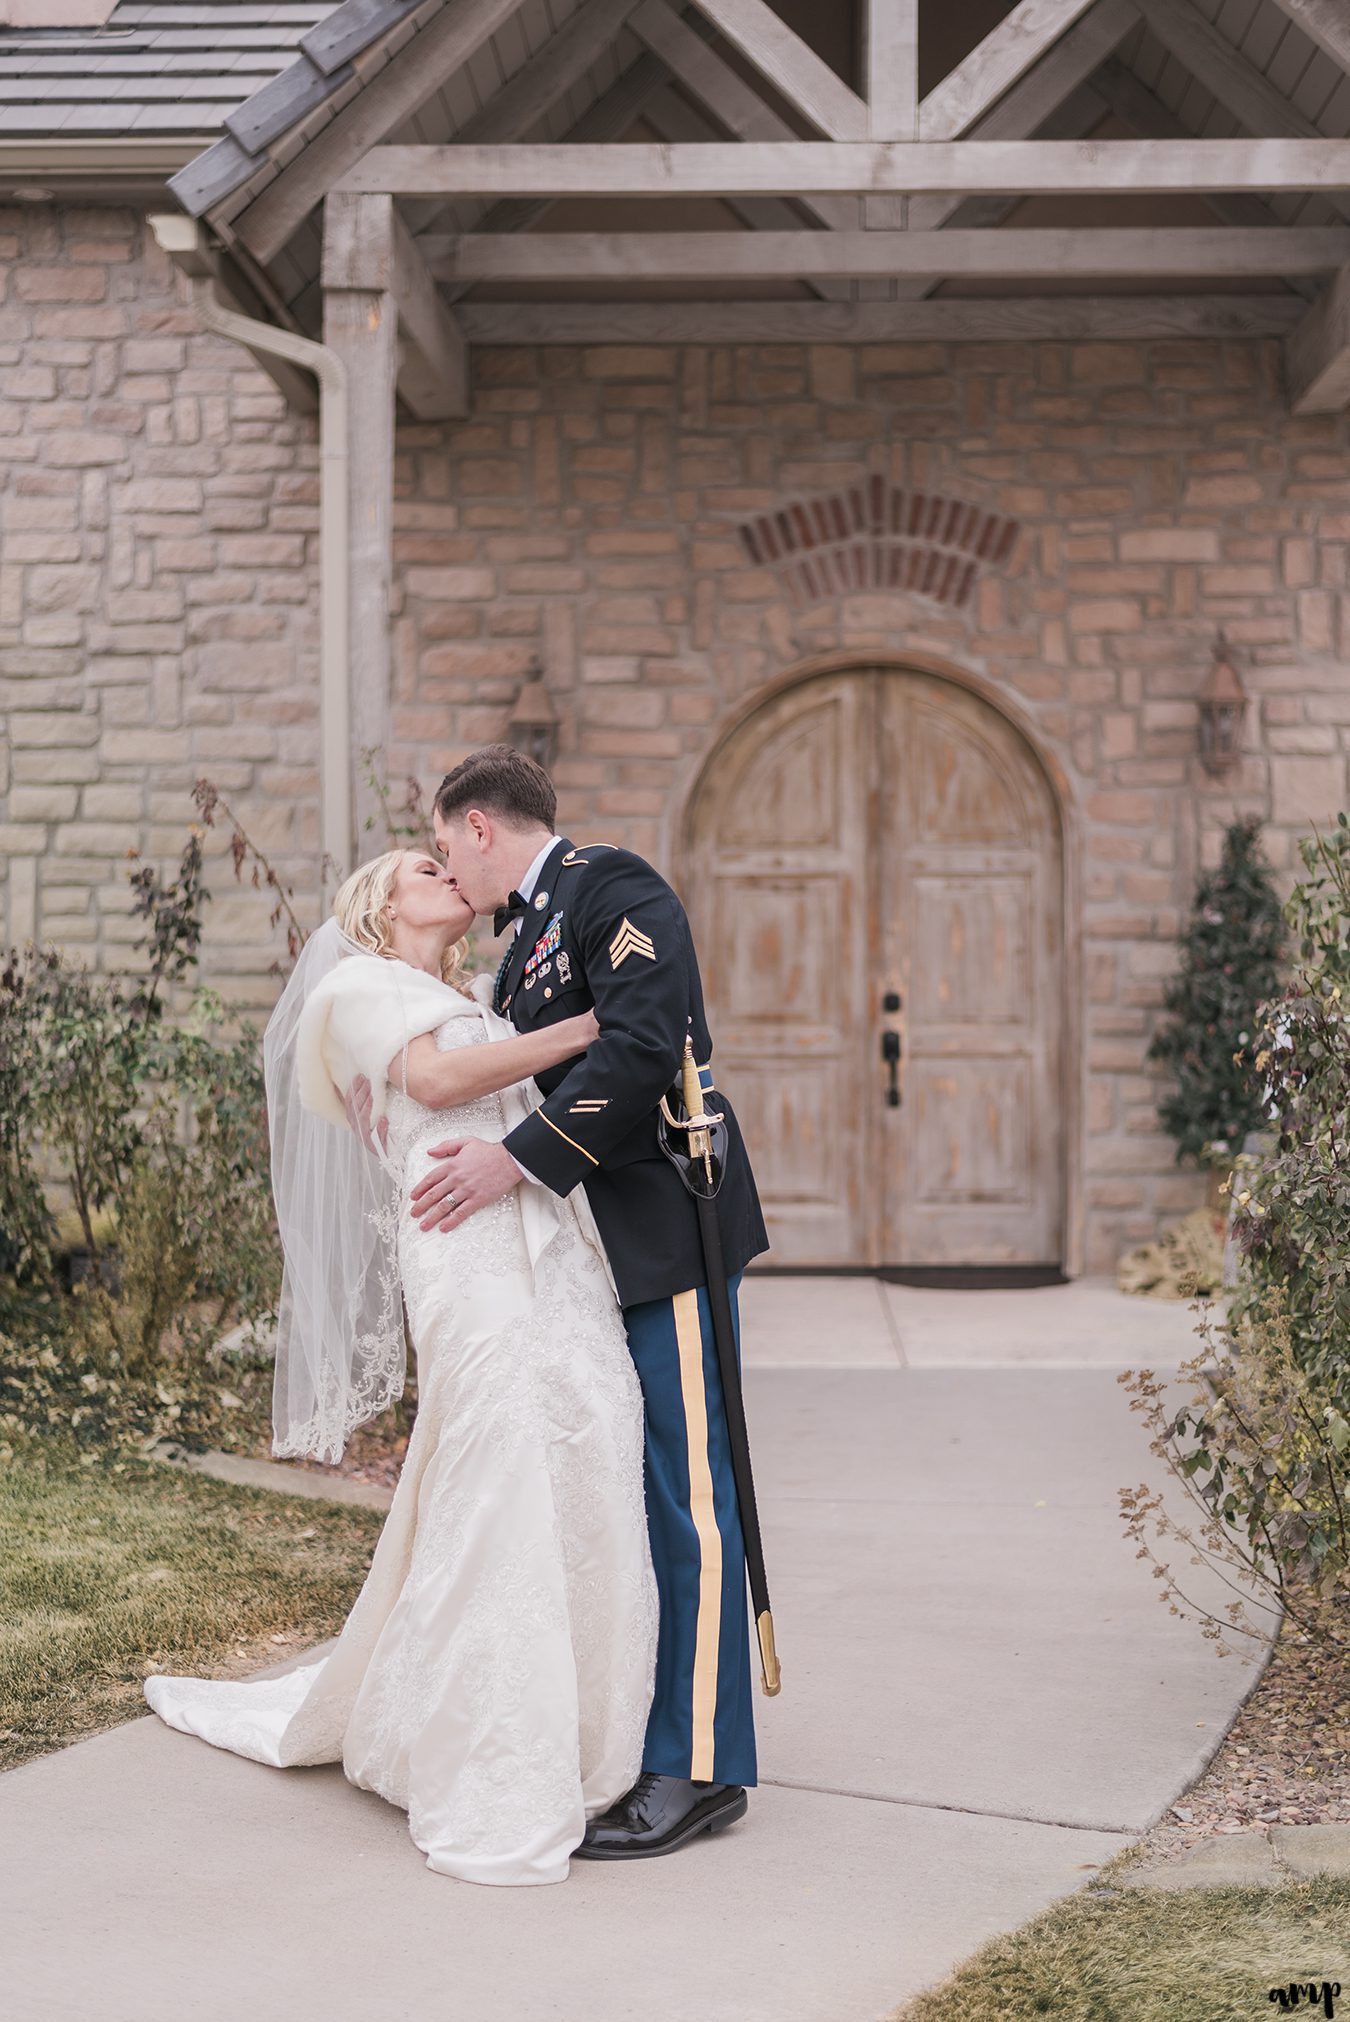 Winter Wedding at Two Rivers Winery in Grand Junction | amanda.matilda.photography